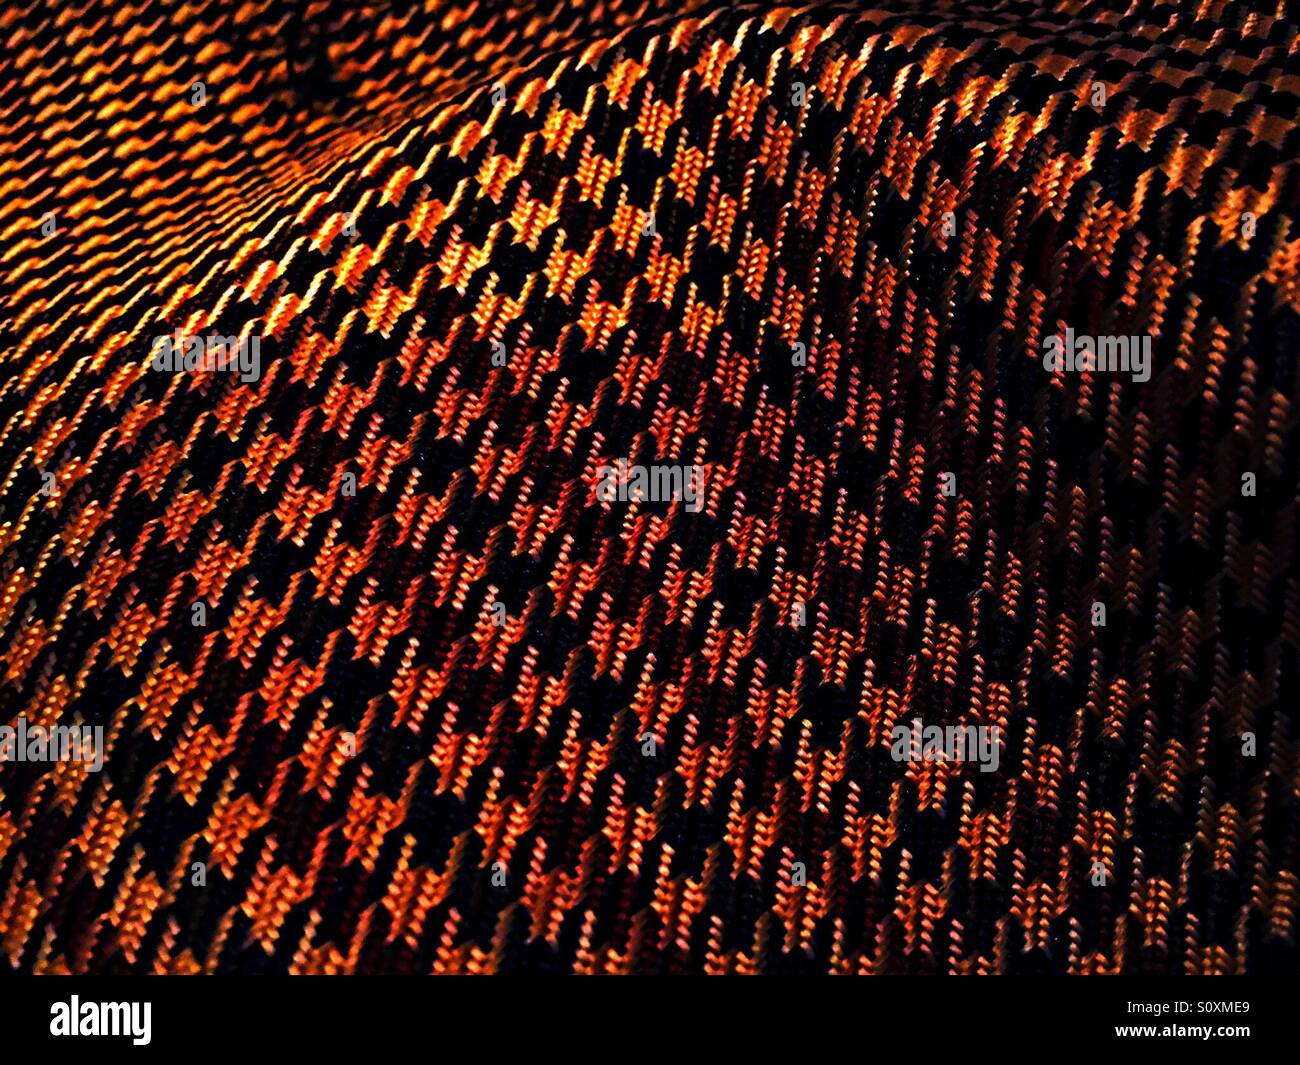 Houndstooth patterned fabric Stock Photo